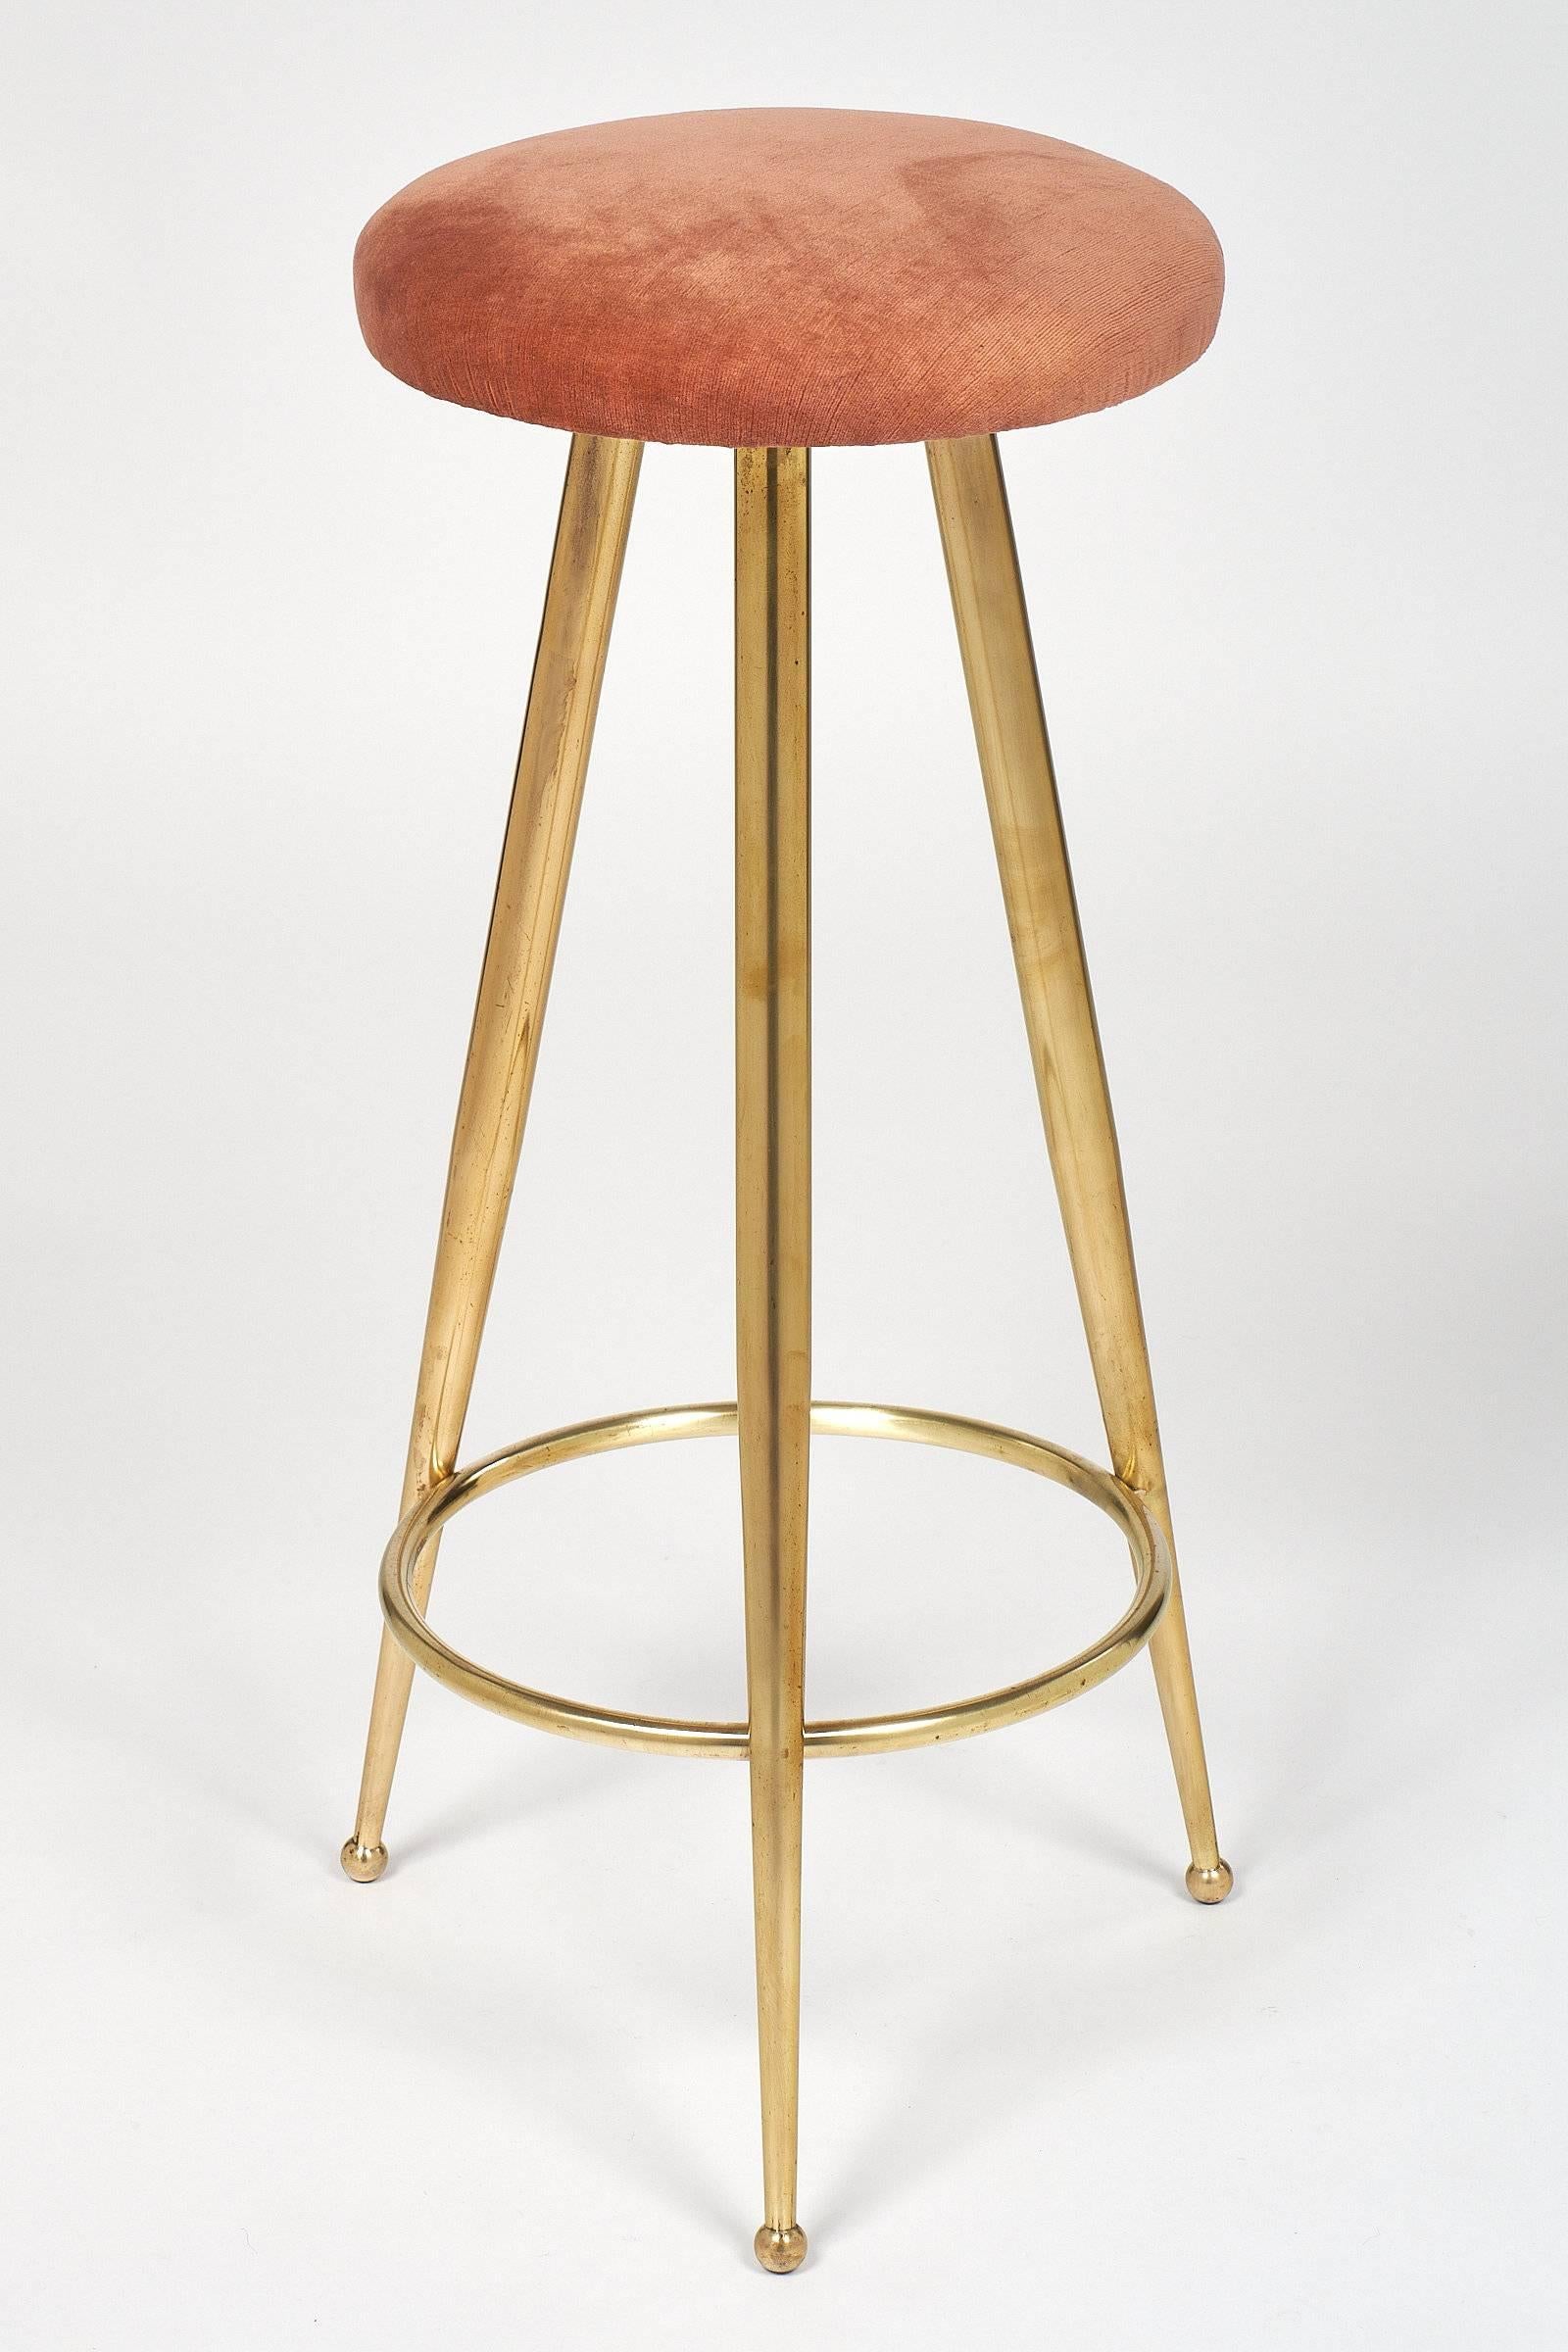 From a Hotel in Milan, a pair of brass bar stools in the manner of Gio Ponti, featuring a tripod base with tapered legs. The legs are braced with a circular stretcher and have spherical brass feet. Very strong craftsmanship and design typical of